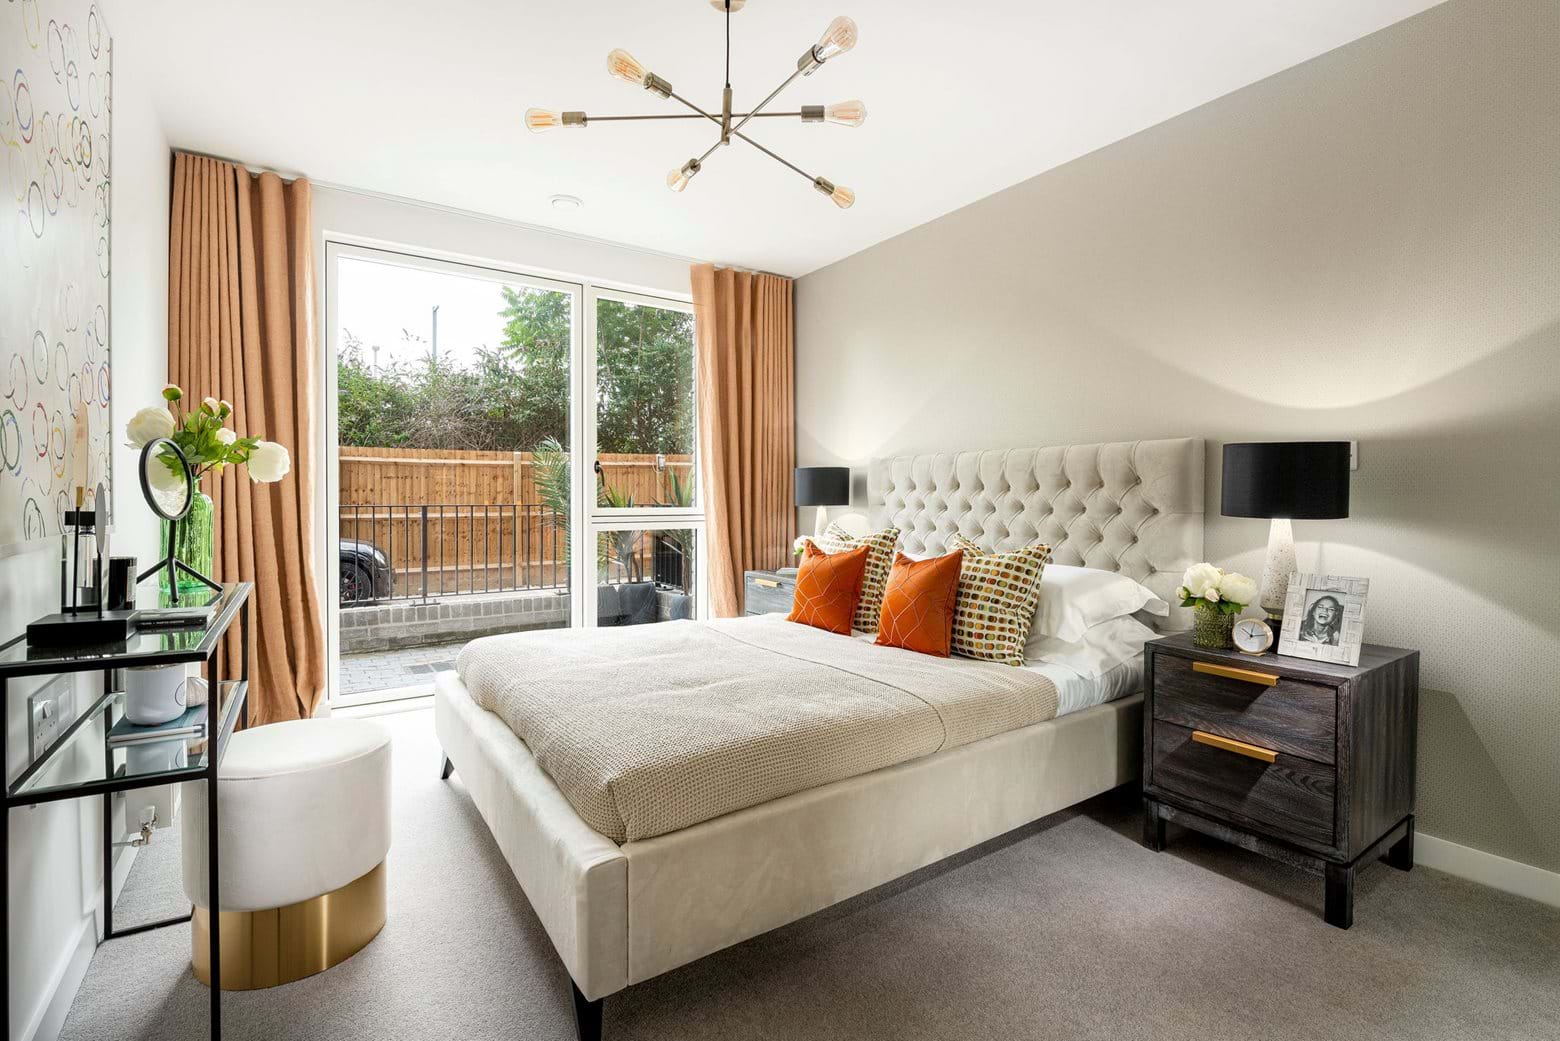 Bedroom at Shared ownership show home at Bridge East, E15